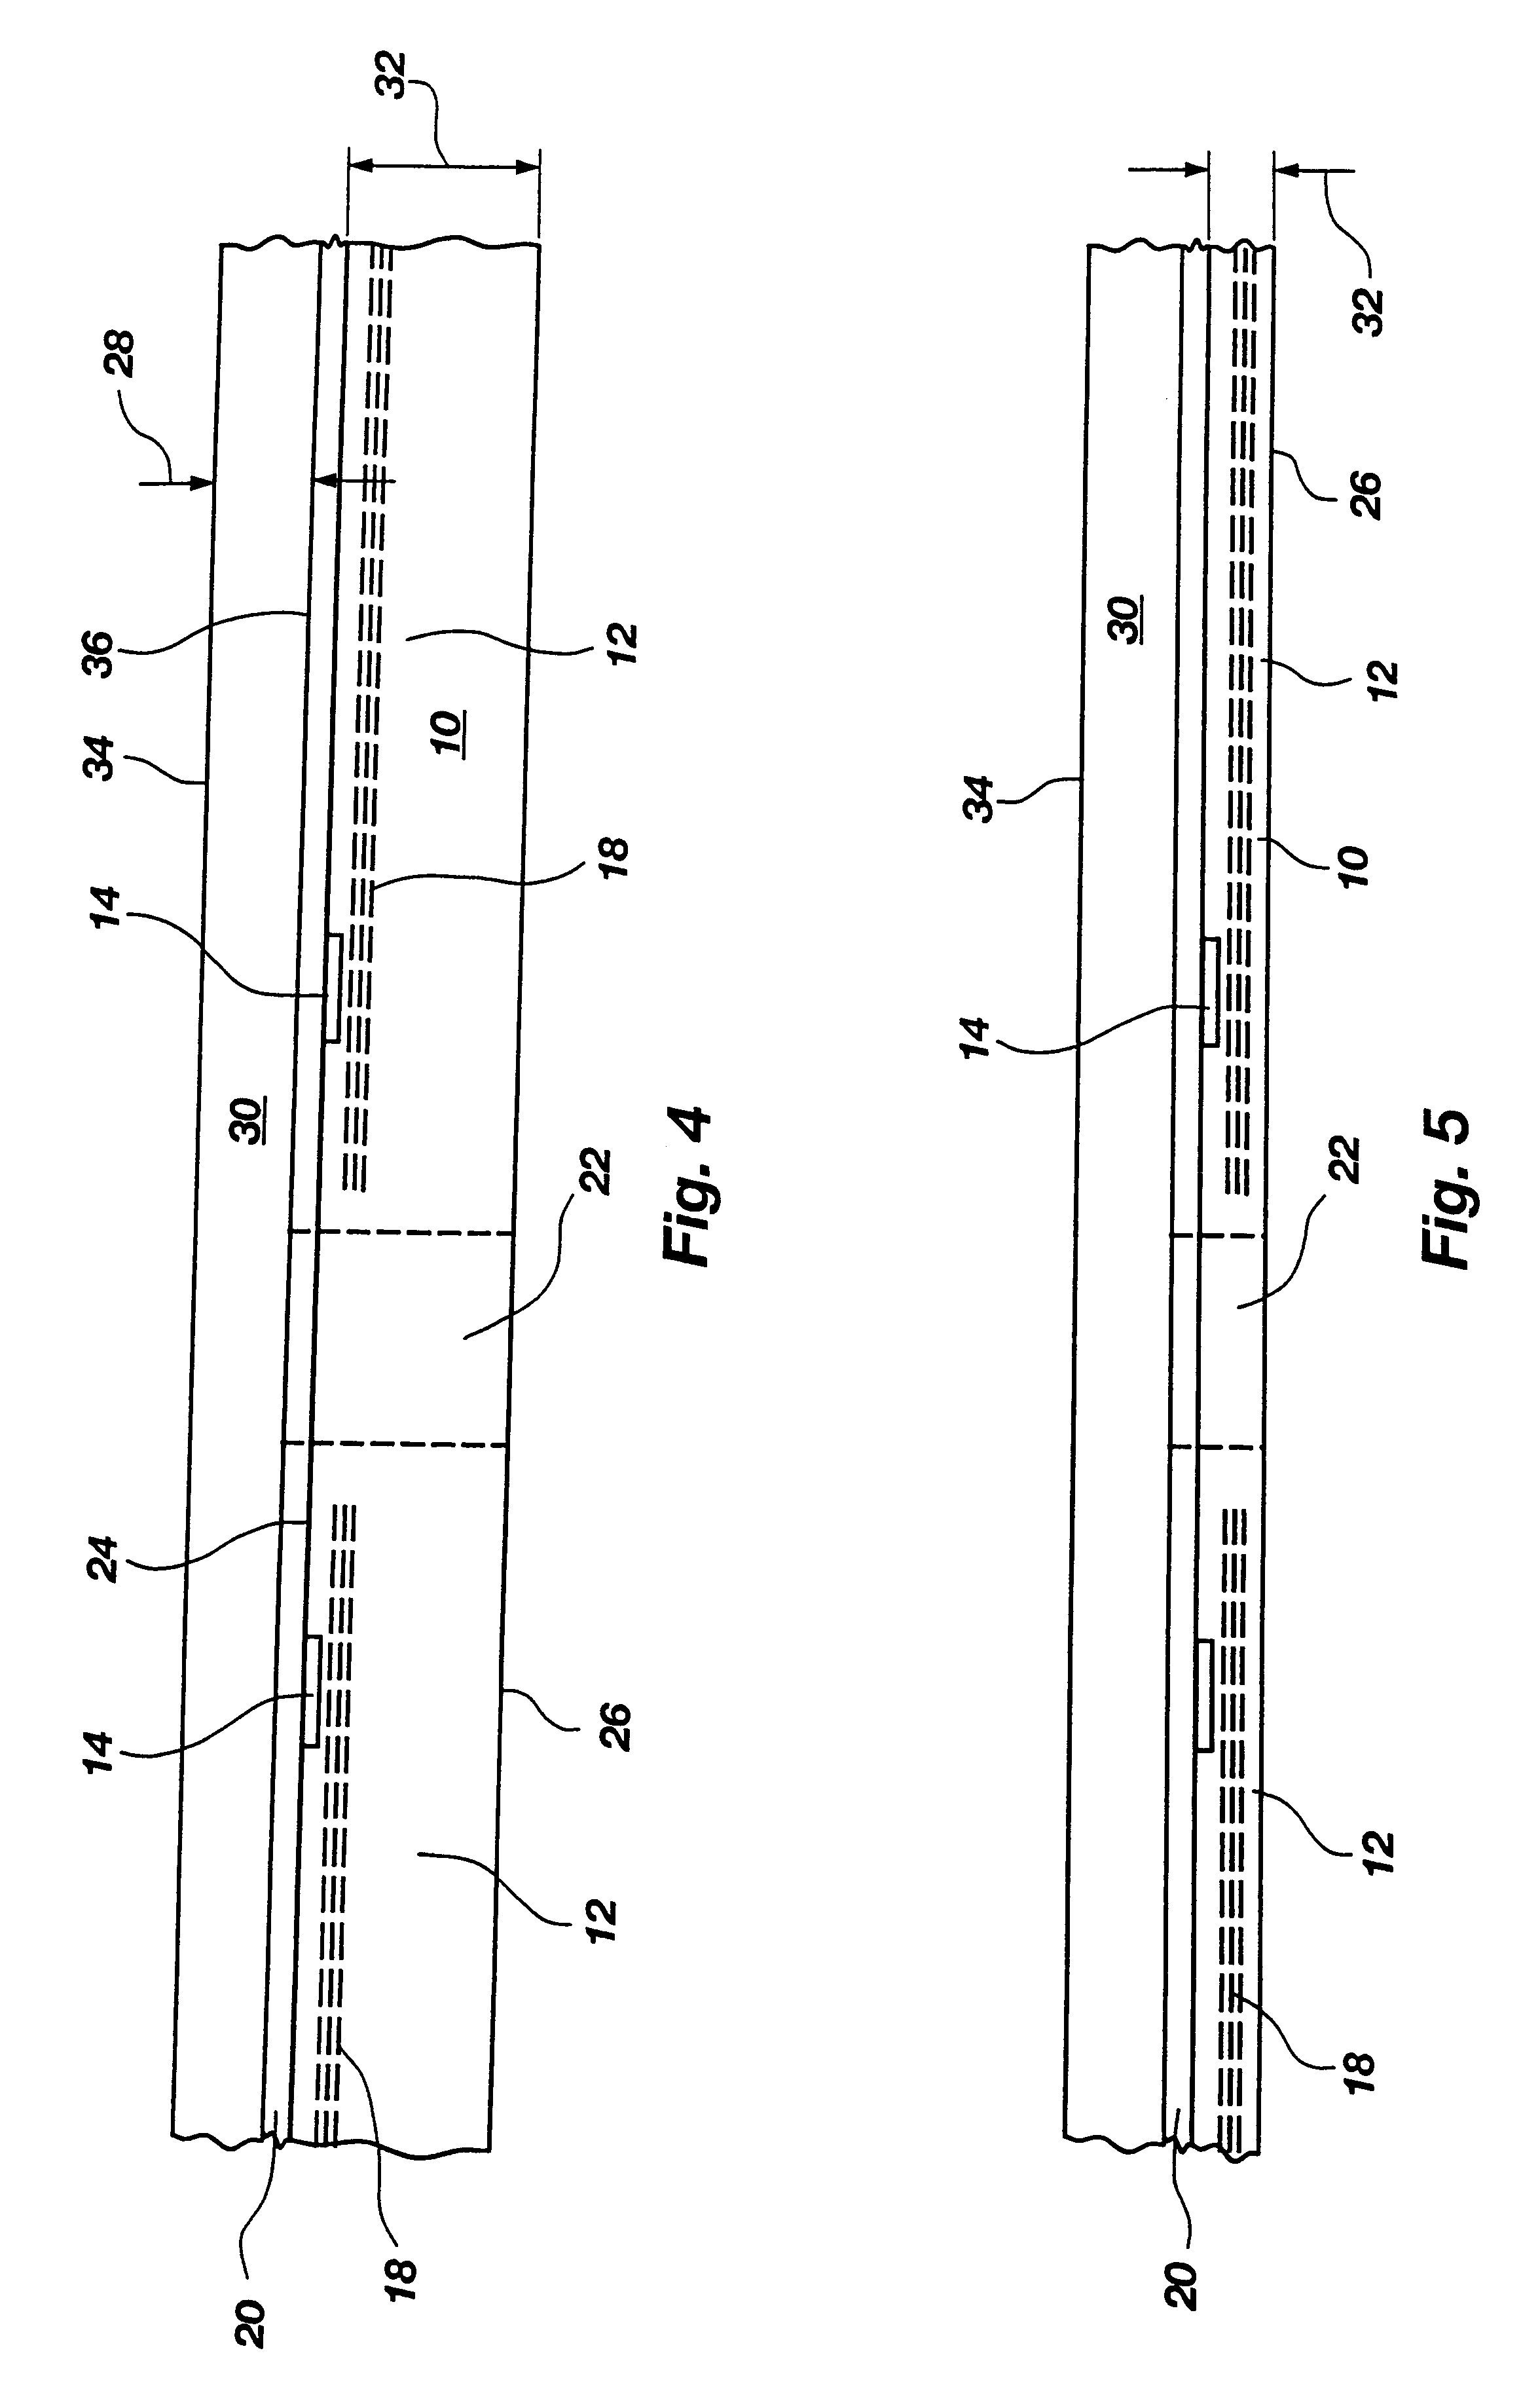 Wafer level fabrication and assembly of chip scale packages